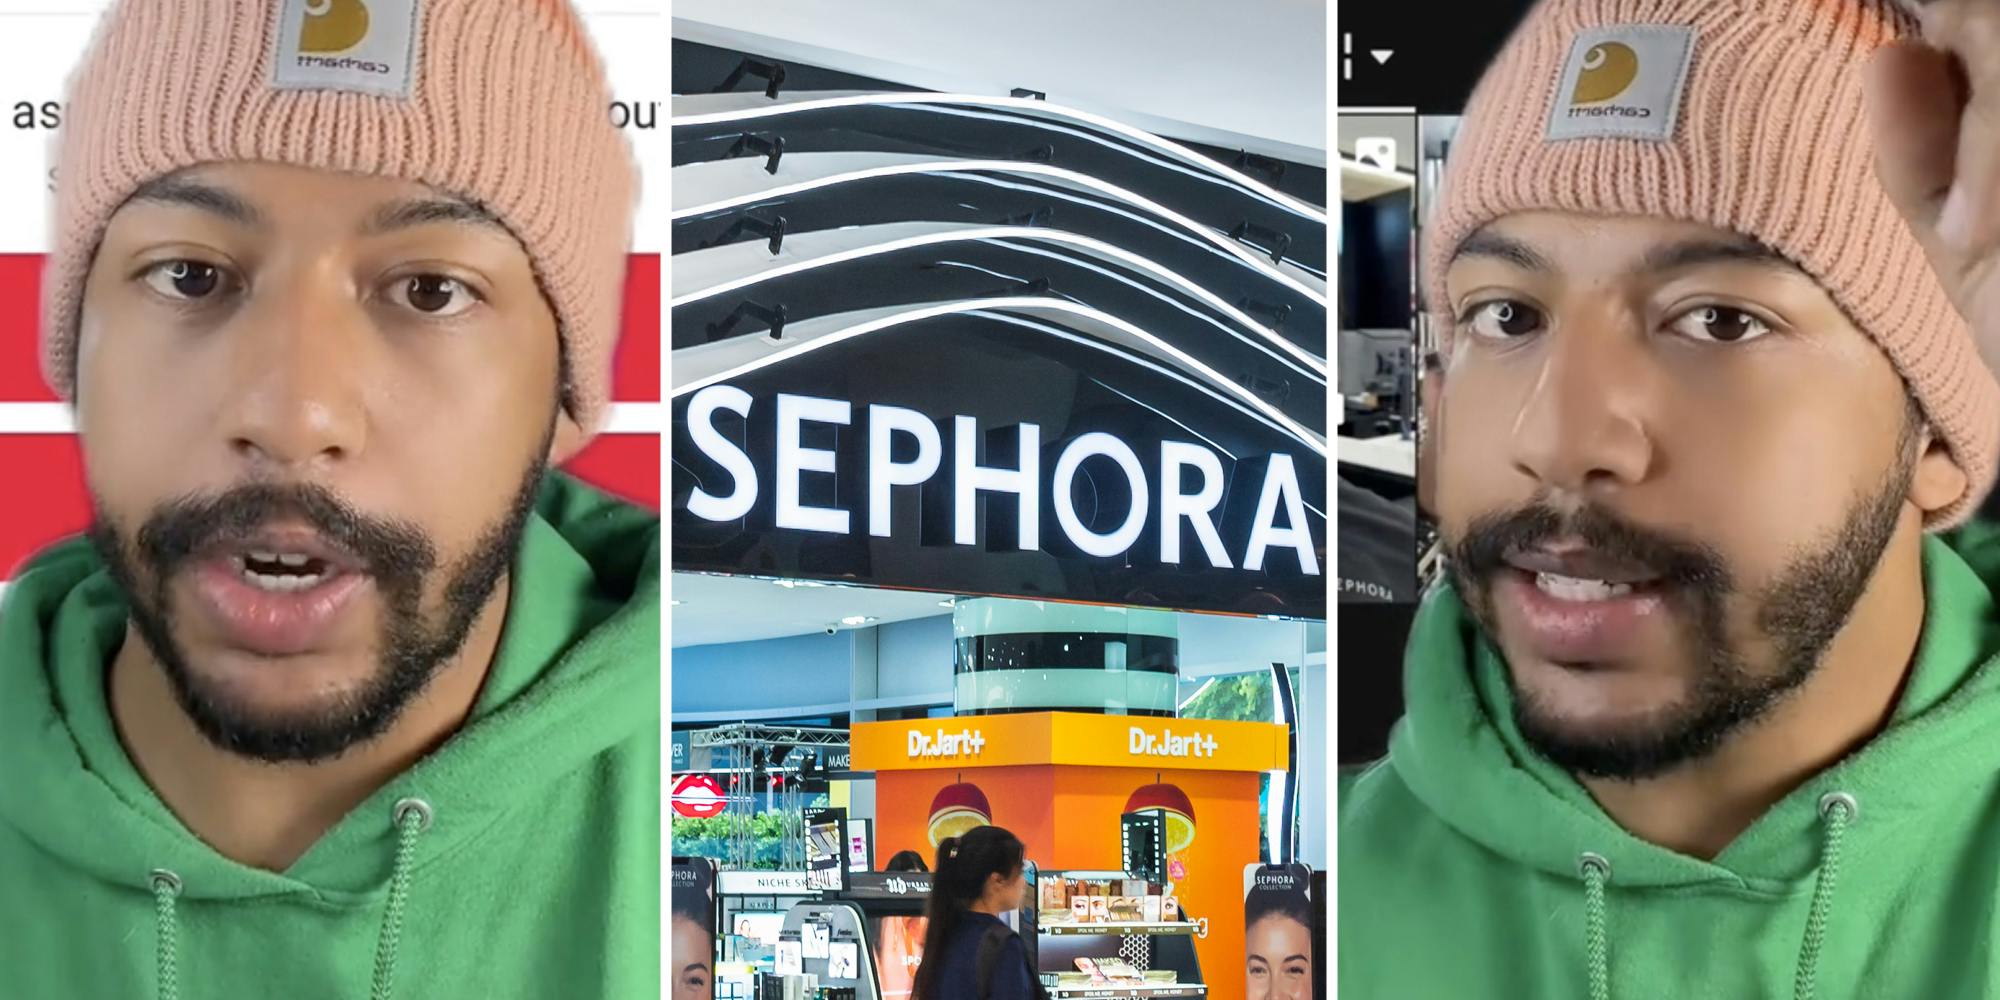 ‘I almost fell for it’: Expert issues warning on Sephora gift card ‘scam’